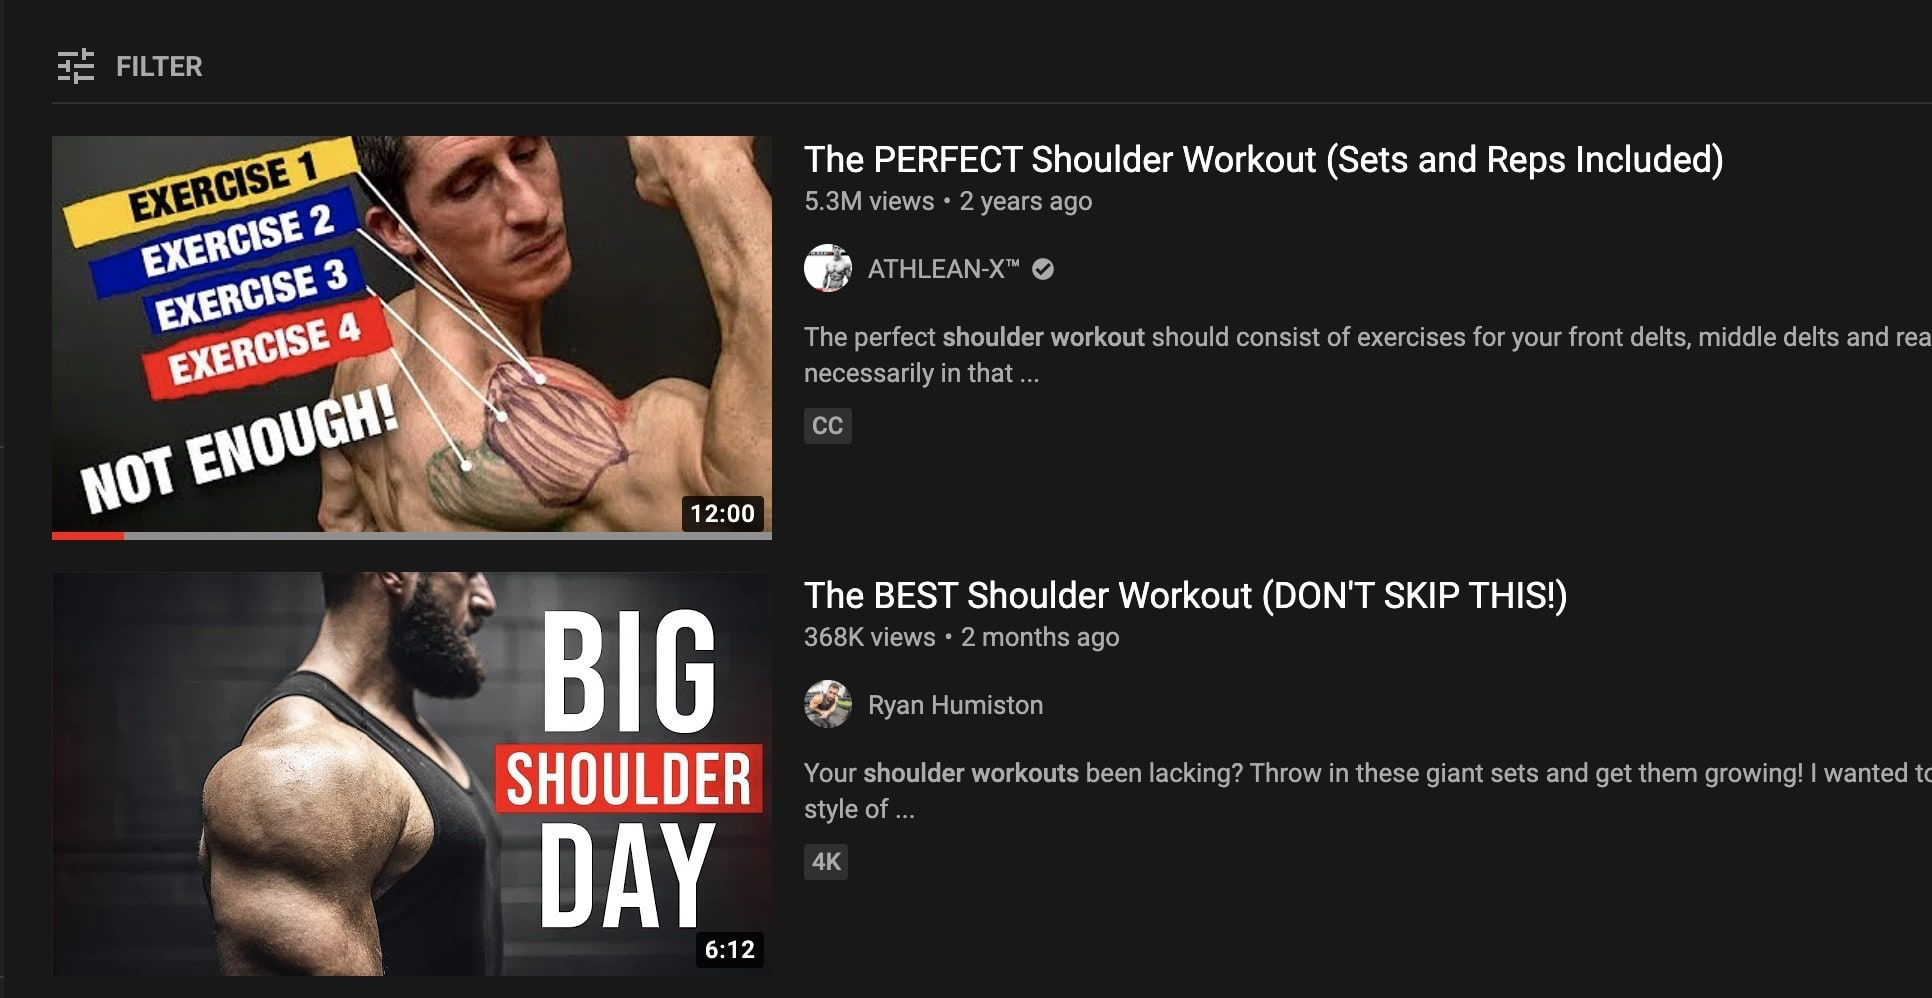 The Top 10 Fitness Searches on YouTube [2021]